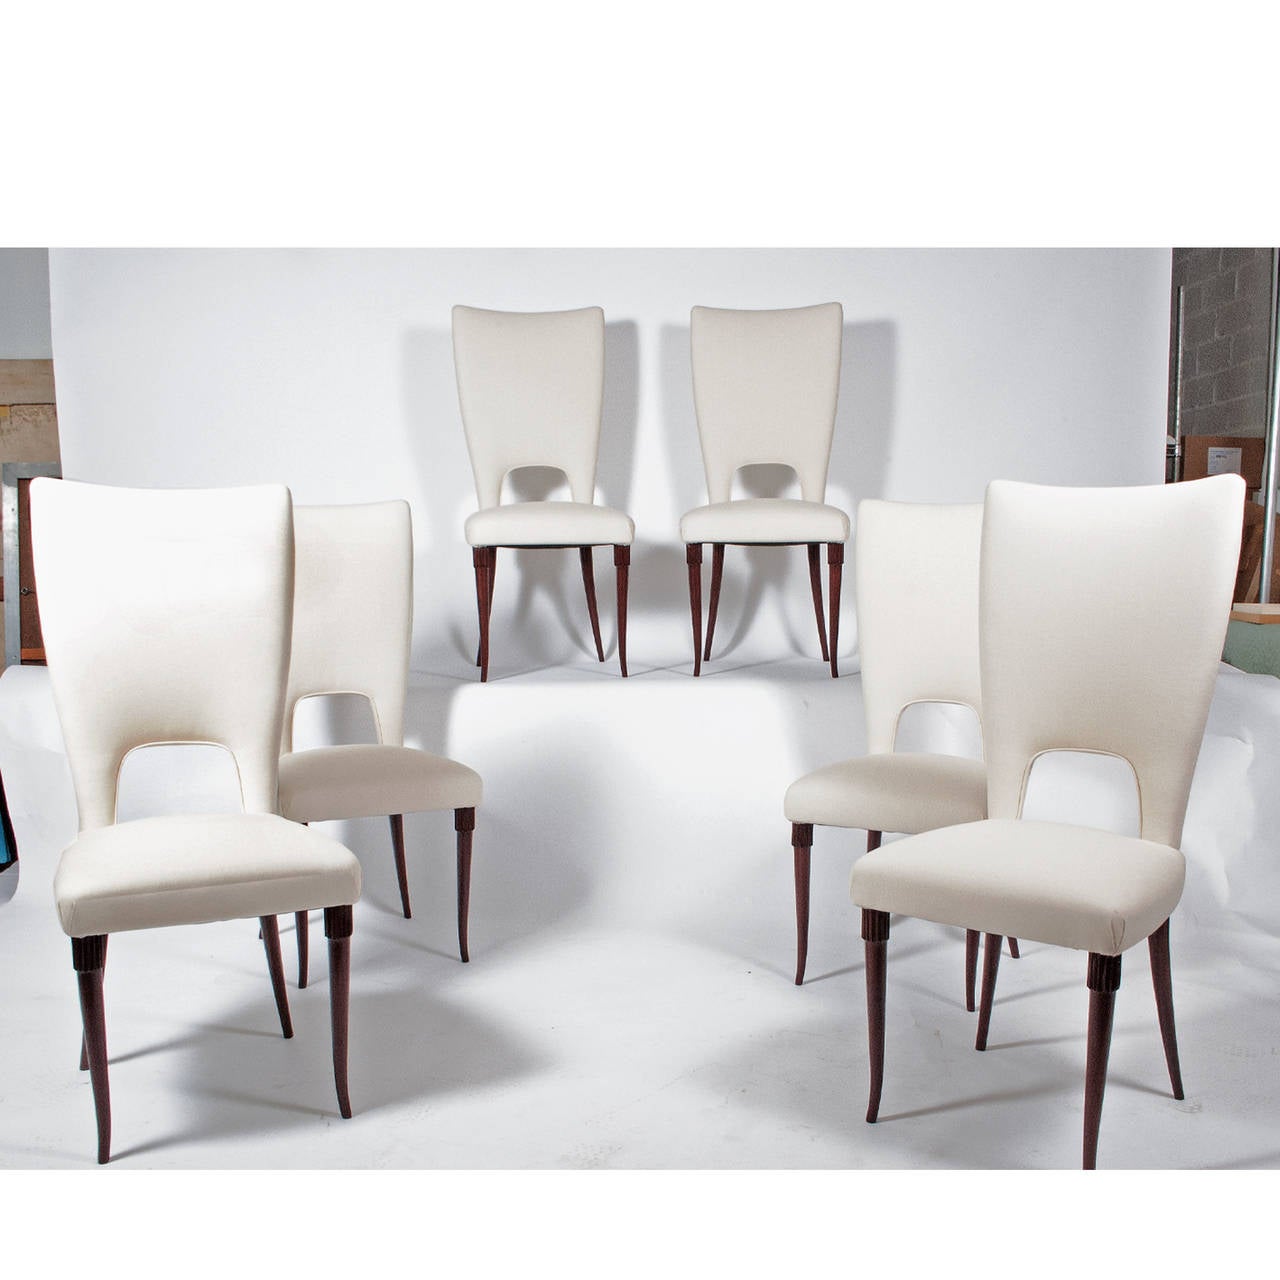 Sensuous high back chairs with opening at back, fully upholstered on curving, hand-sculpted wood legs with fluted detail. Retains label, 